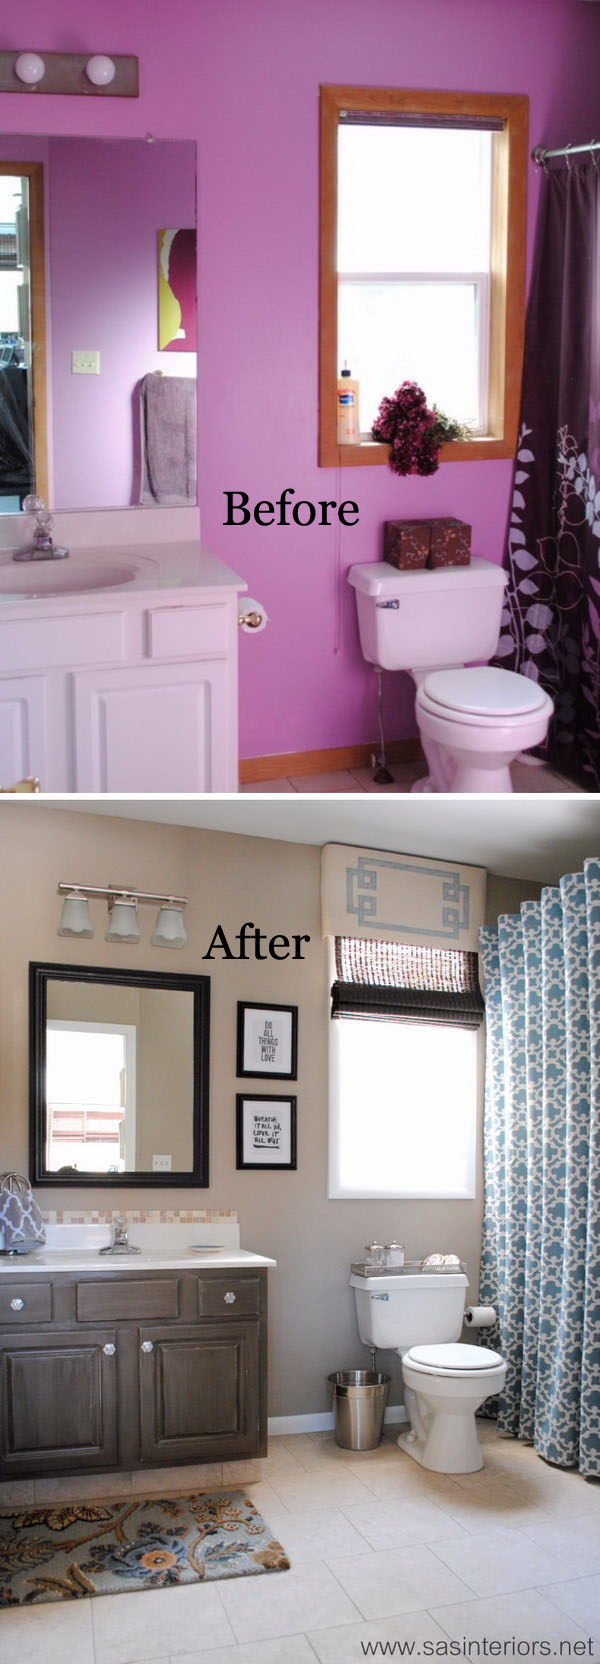 29-30-bathroom-remodel-before-and-after